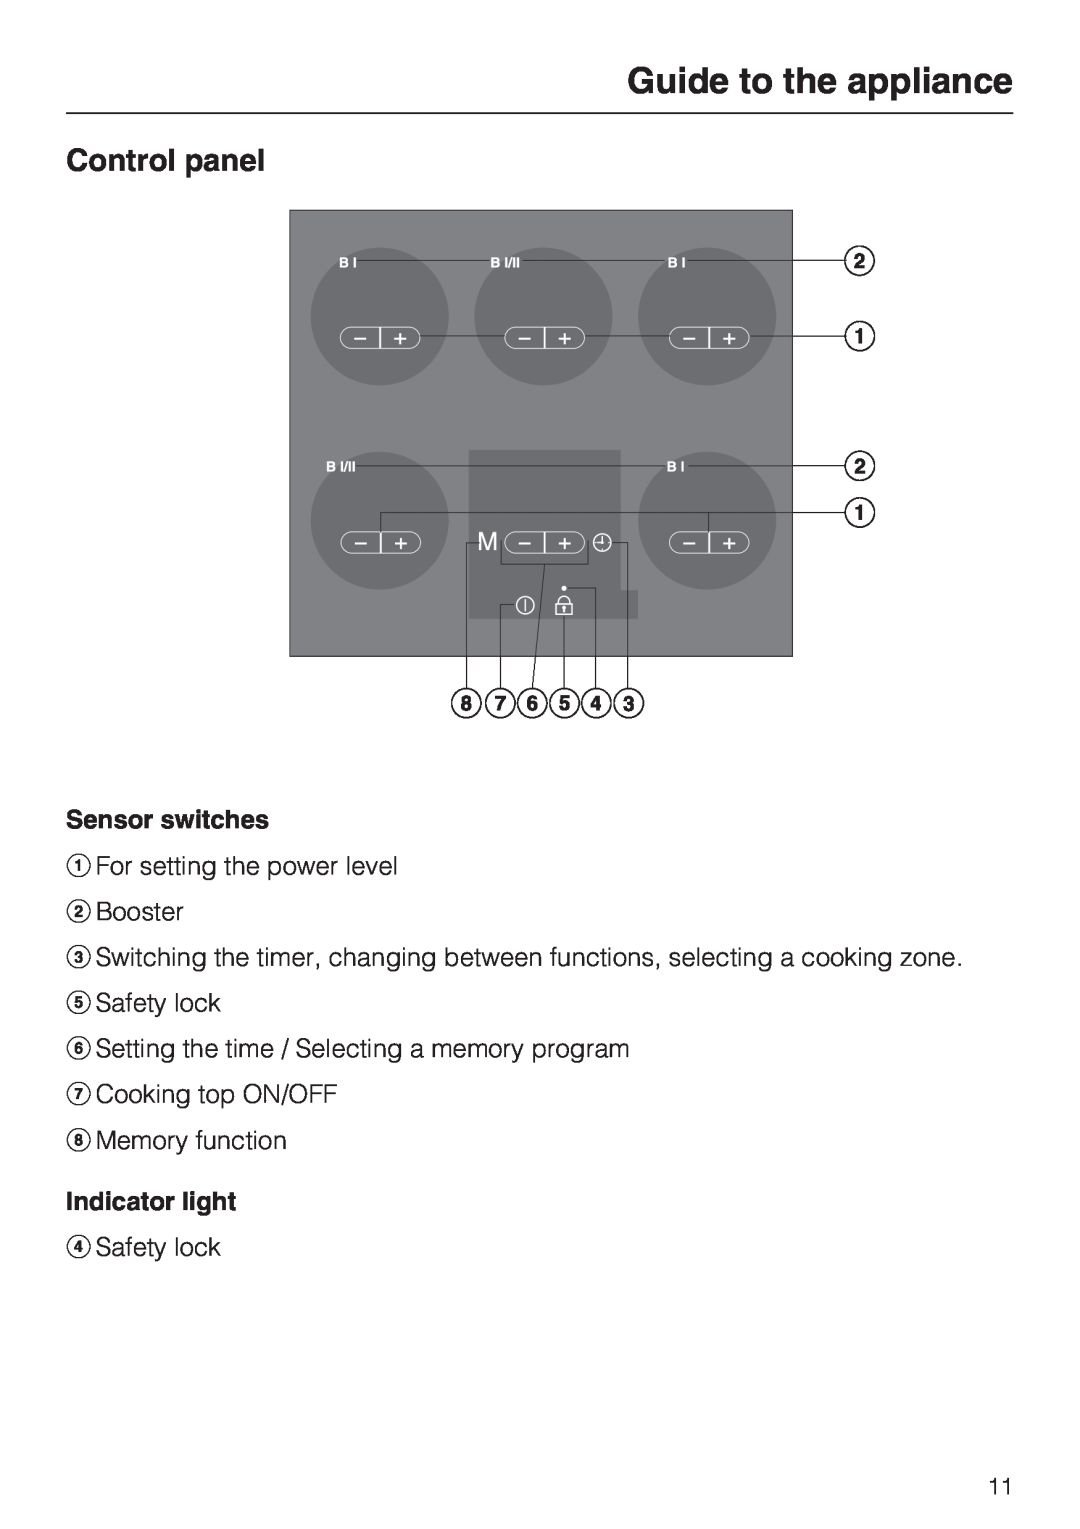 Miele KM 5987, KM 5993 installation instructions Control panel, Sensor switches, Indicator light, Guide to the appliance 